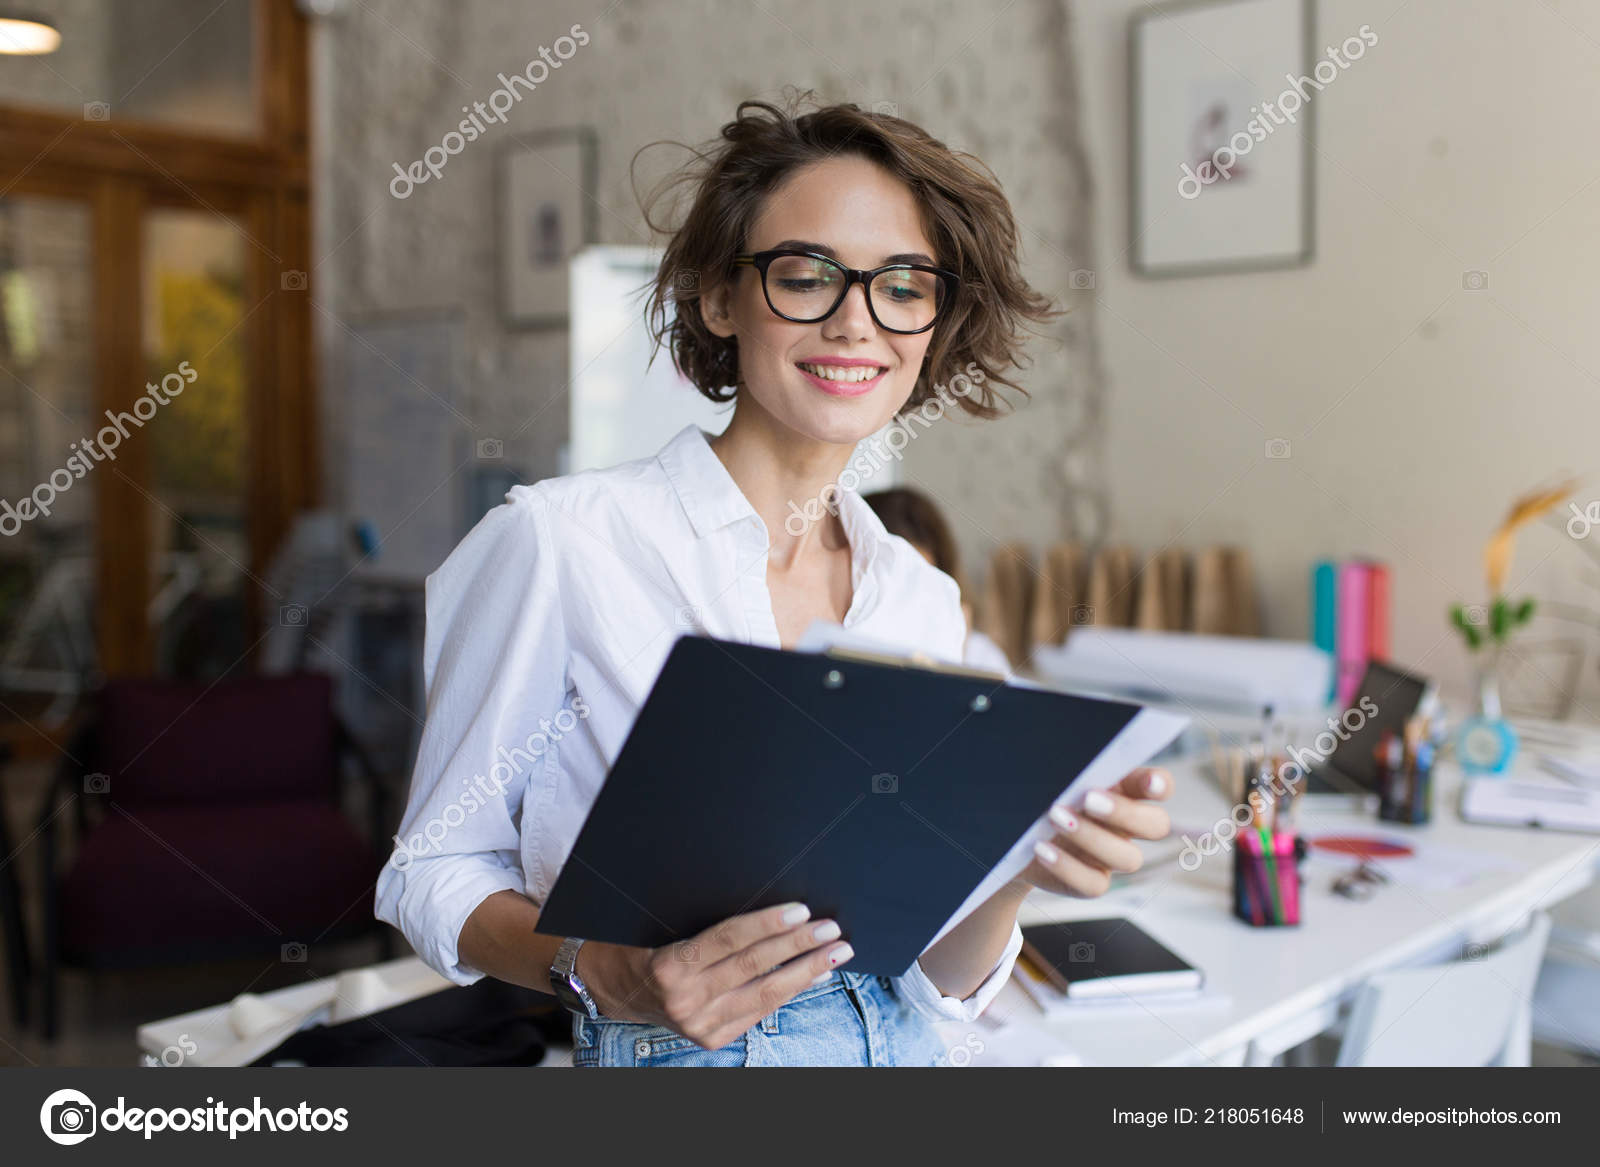 Young Beautiful Smiling Girl Short Curly Hair Eyeglasses White